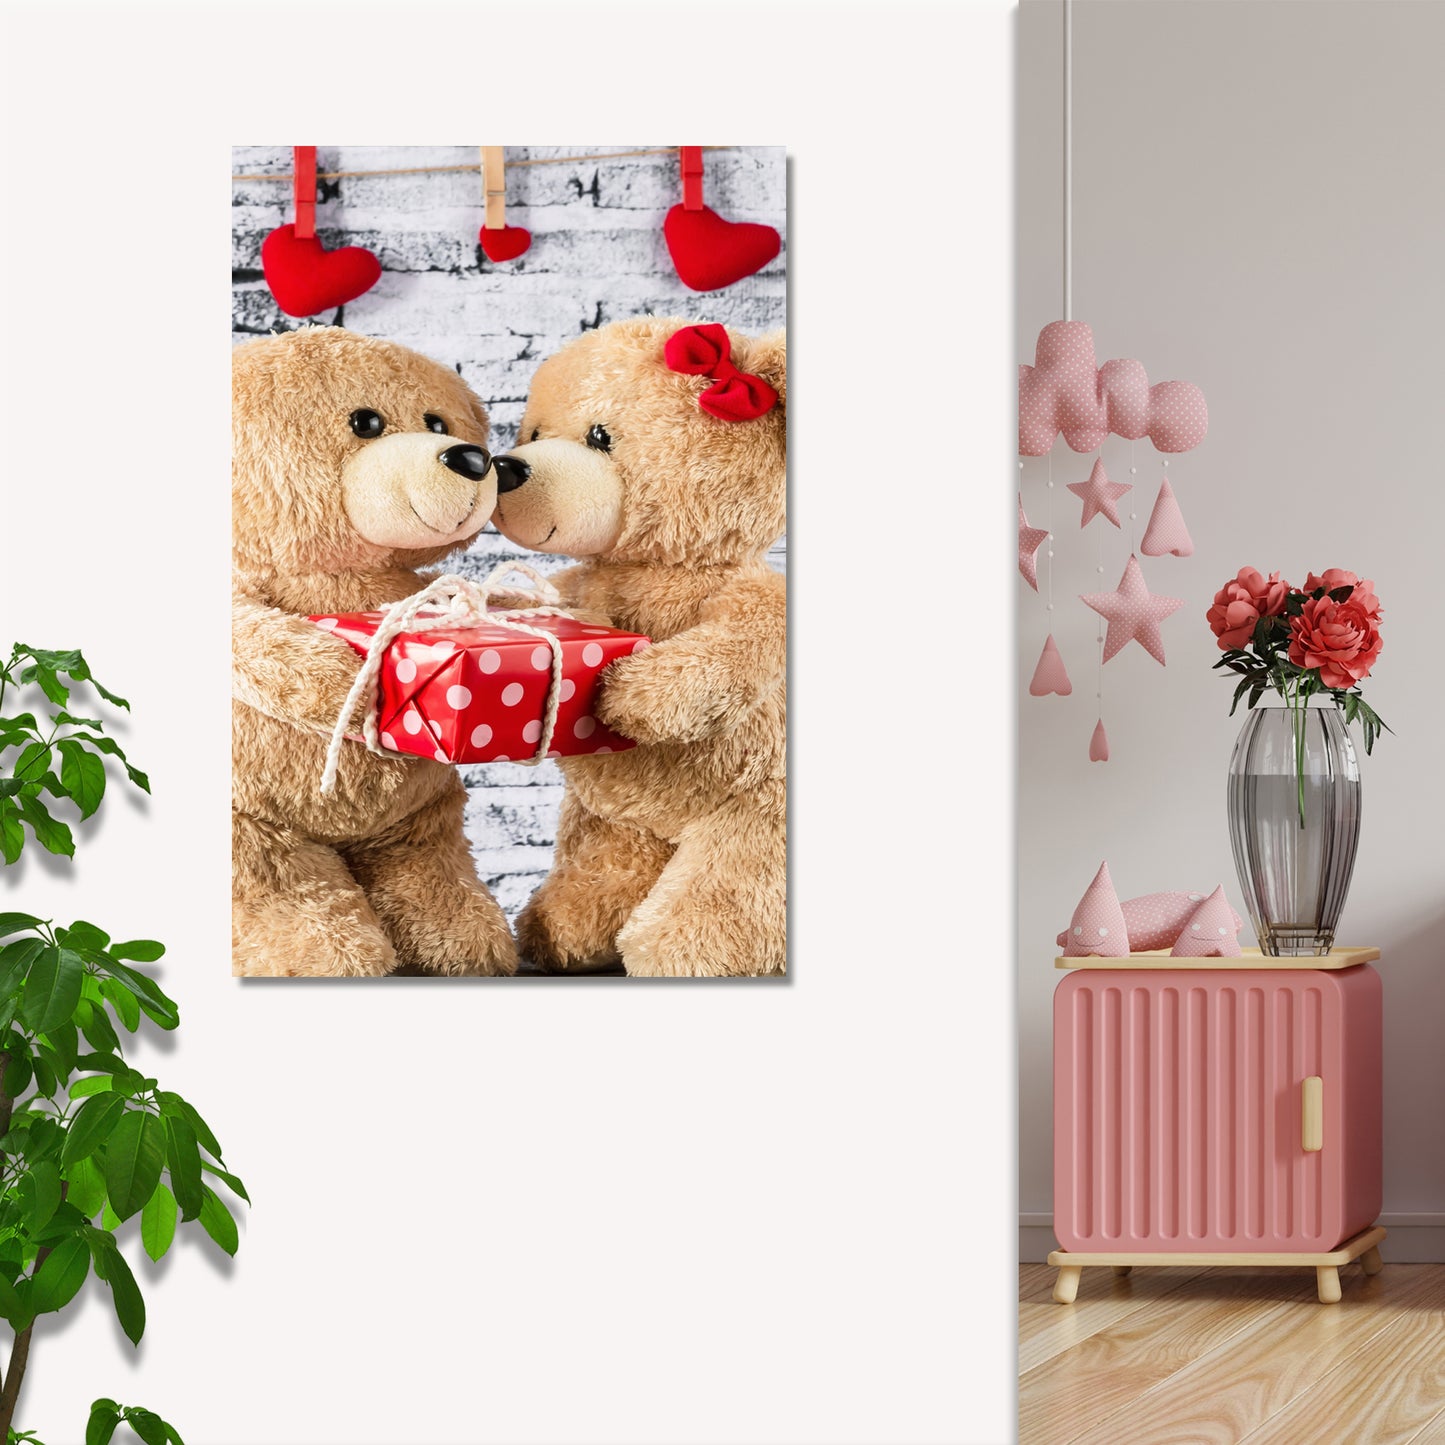 Valentine Teddy Bears Canvas Wall Art Style 1 - Image by Tailored Canvases